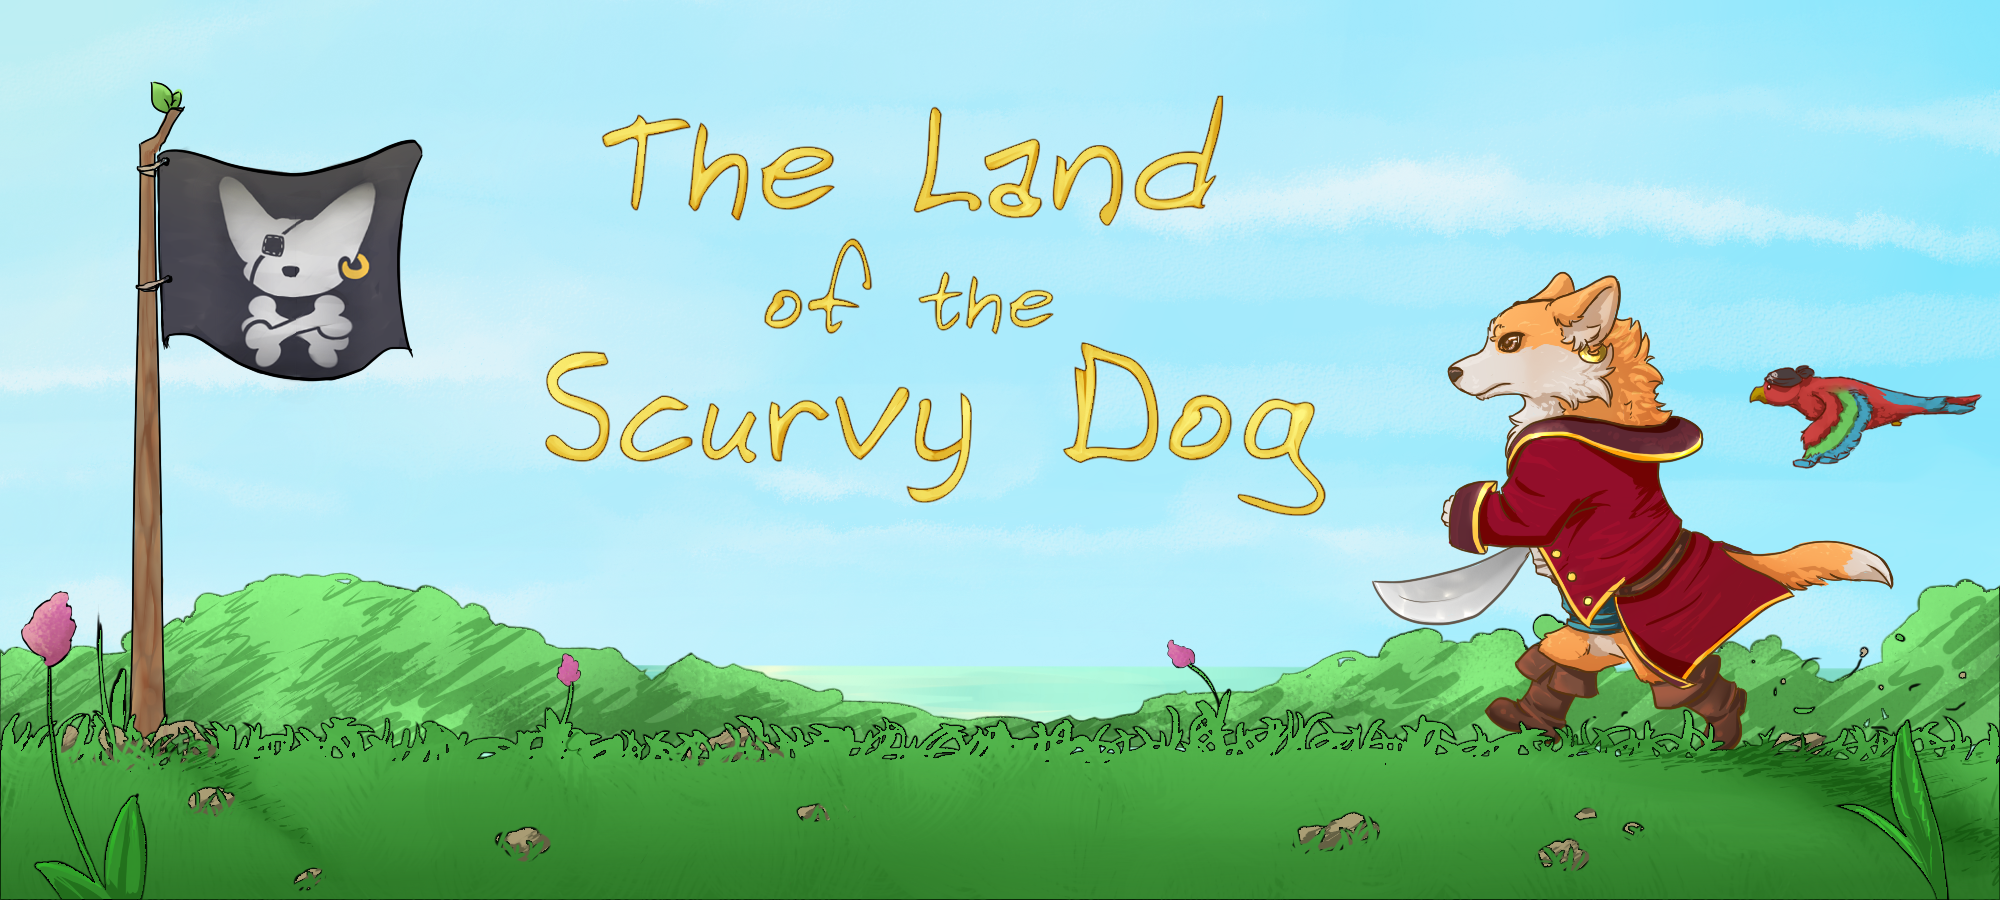 The Land of the Scurvy Dog